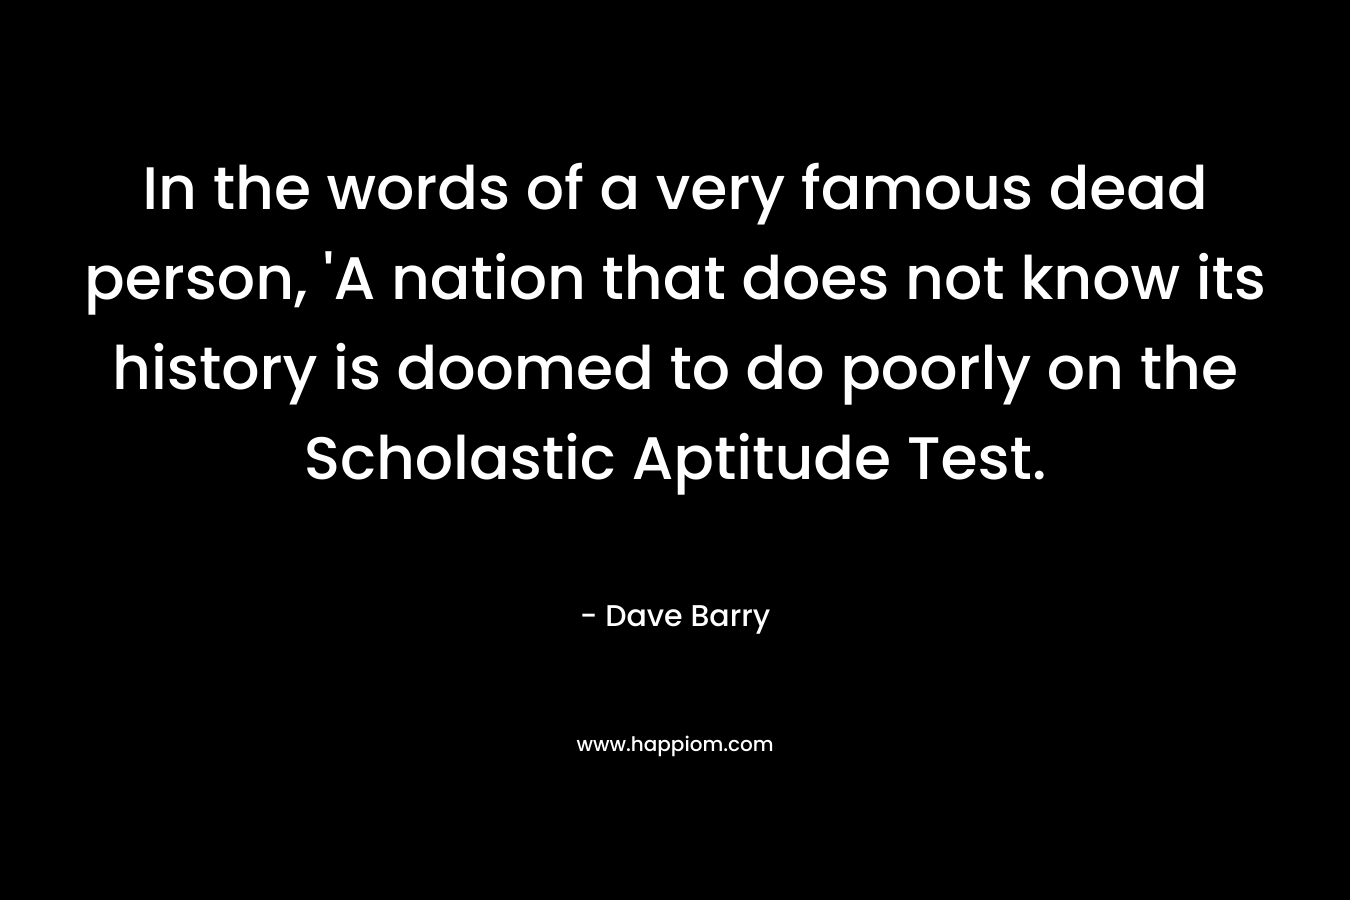 In the words of a very famous dead person, ‘A nation that does not know its history is doomed to do poorly on the Scholastic Aptitude Test. – Dave Barry